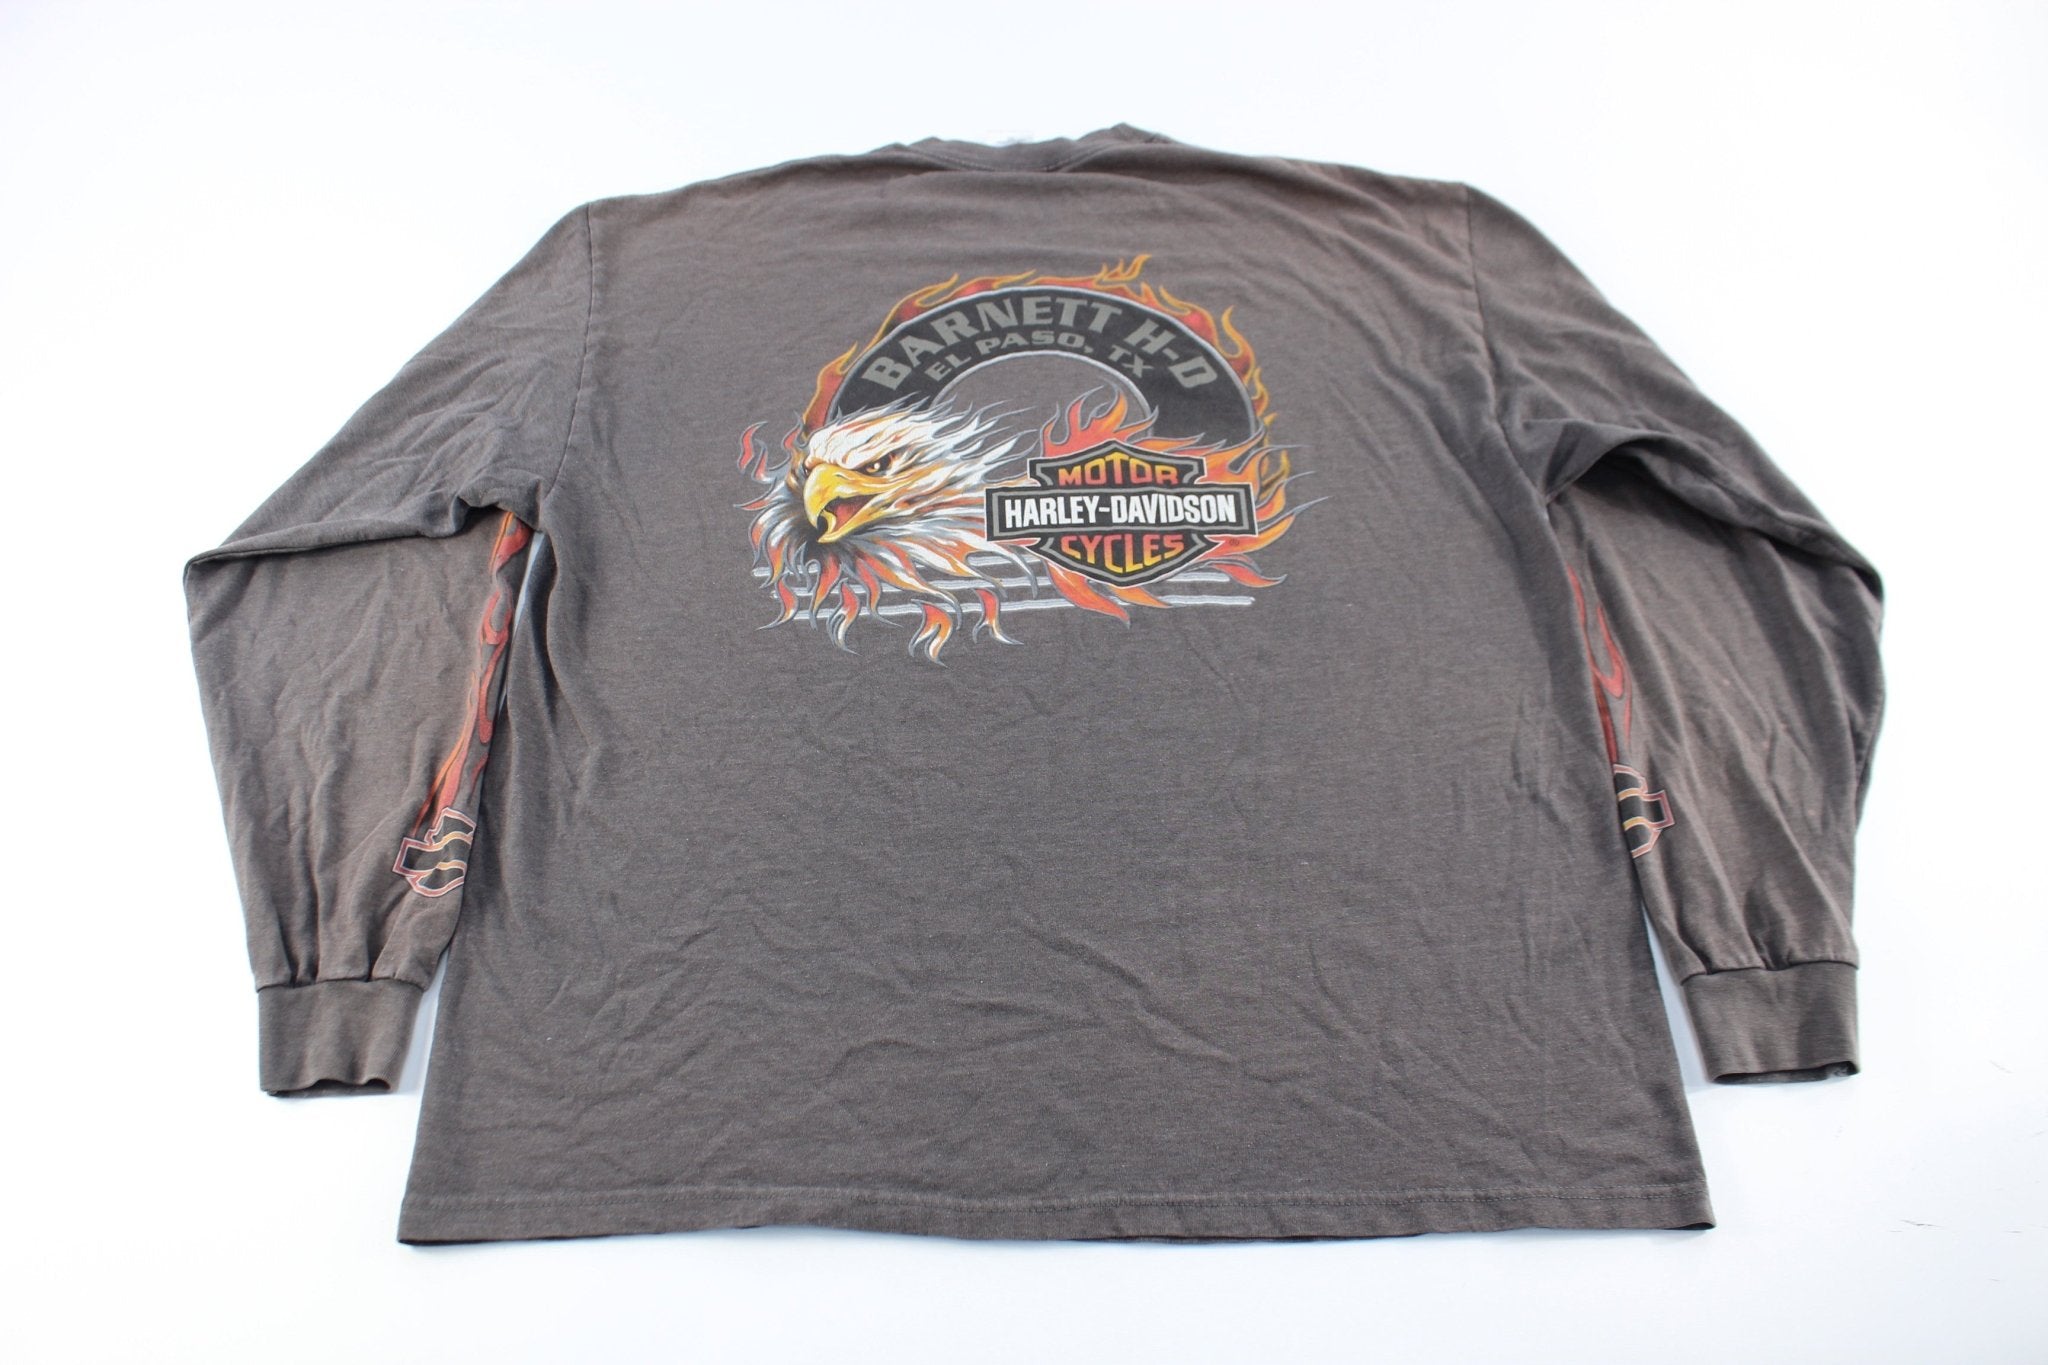 Harley Davidson Motorcycles El Paso, Texas Flame LS T-Shirt - ThriftedThreads.com